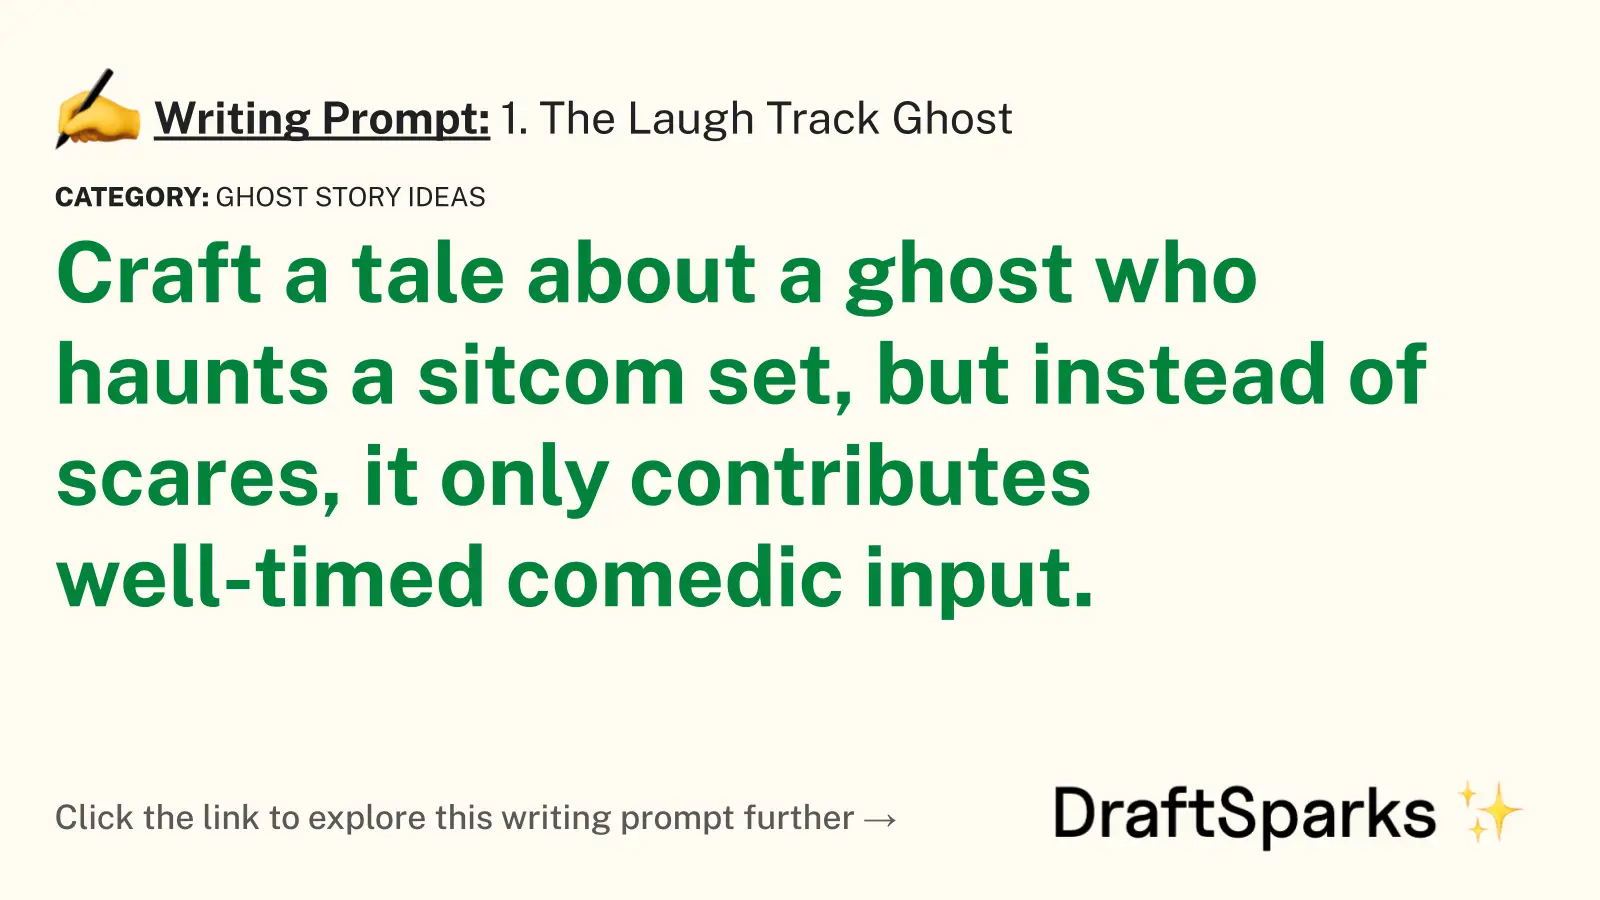 1. The Laugh Track Ghost